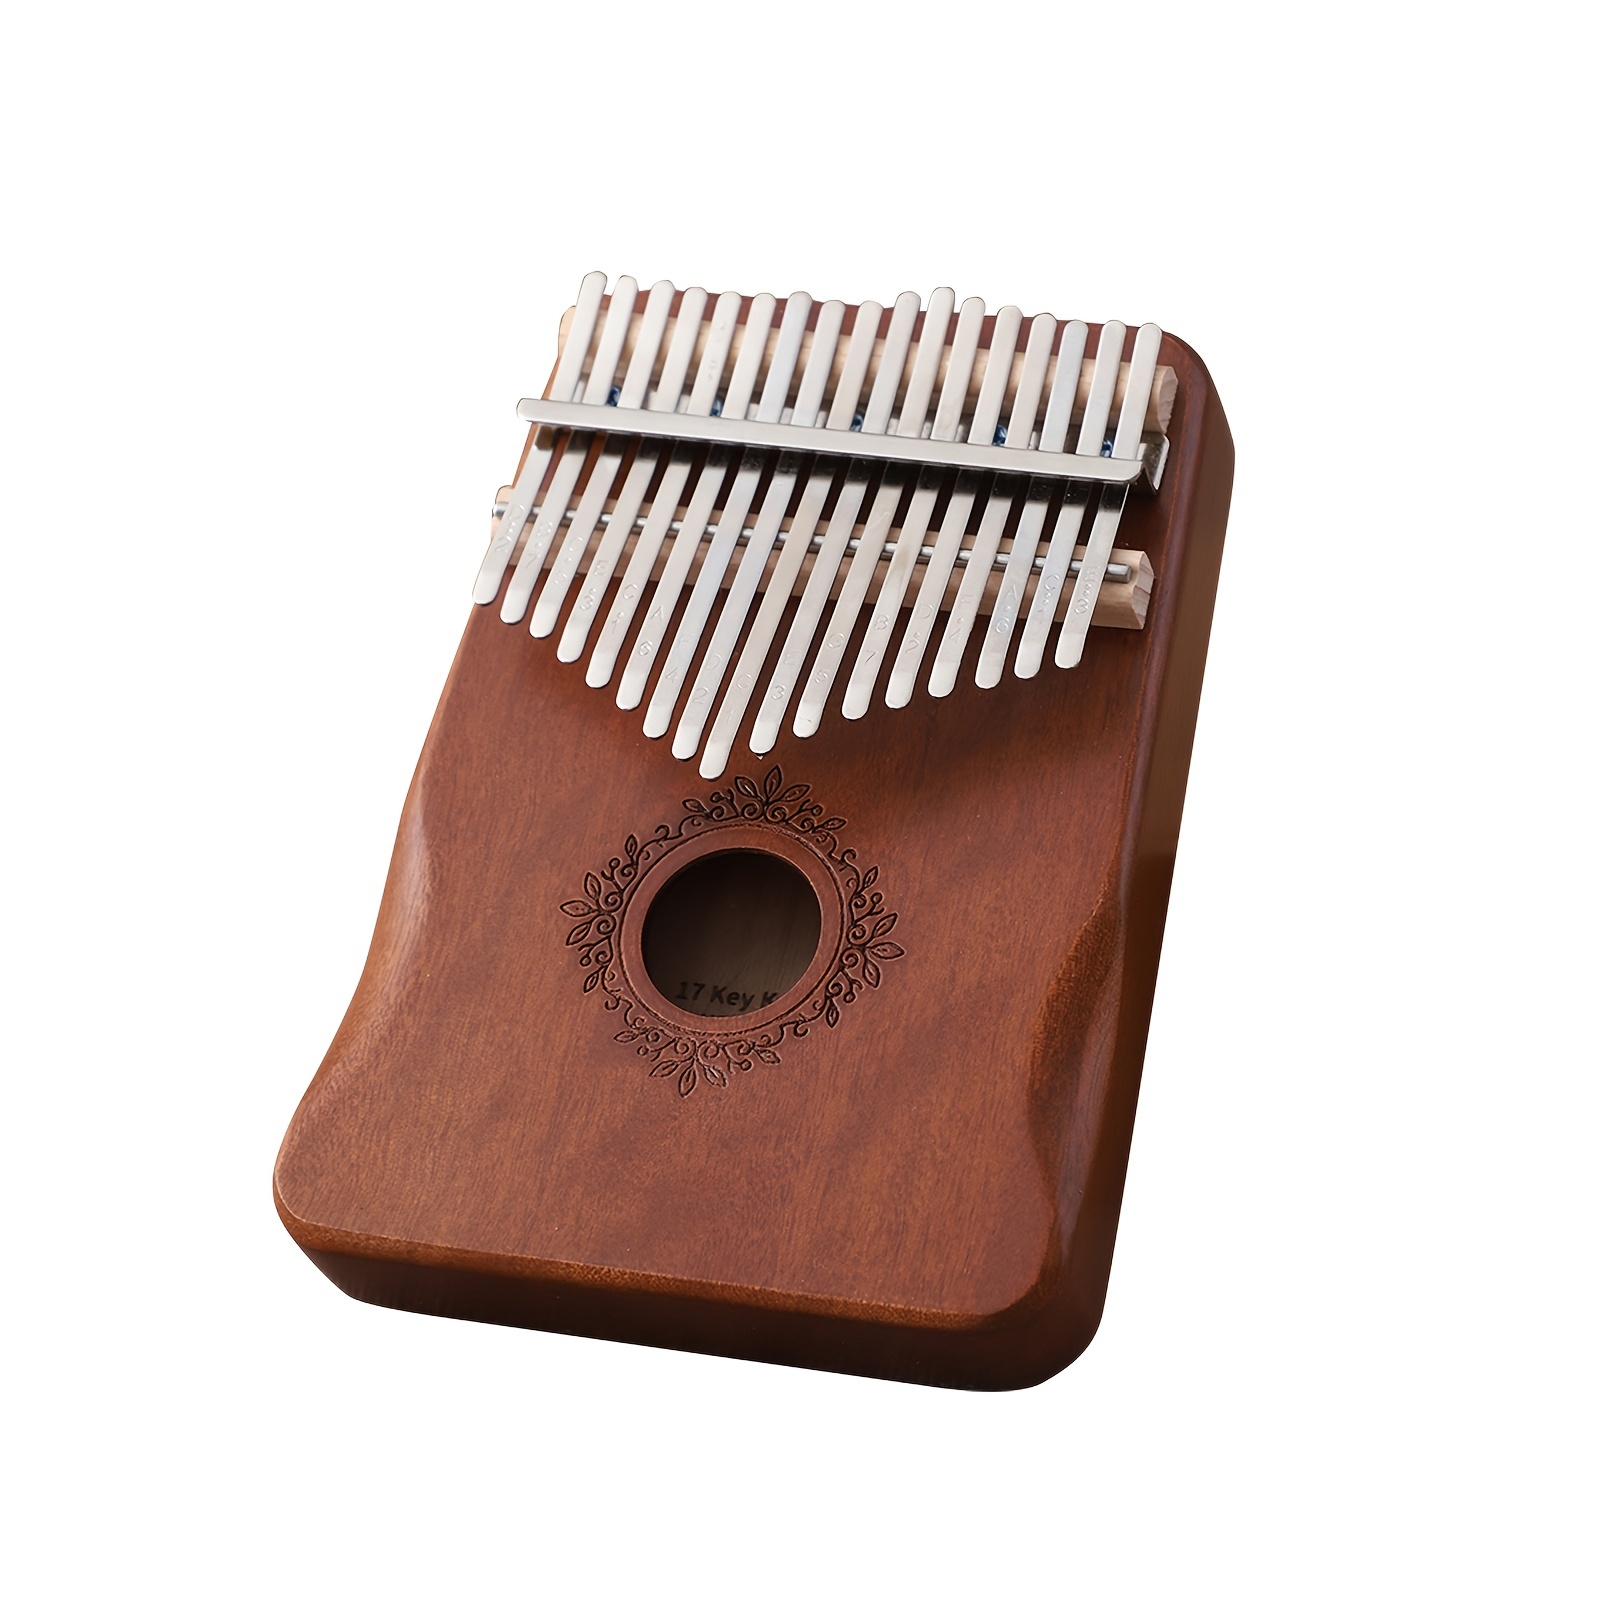 17 Keys Kalimba Thumb Piano - Portable Instrument for Professional and Beginner Players